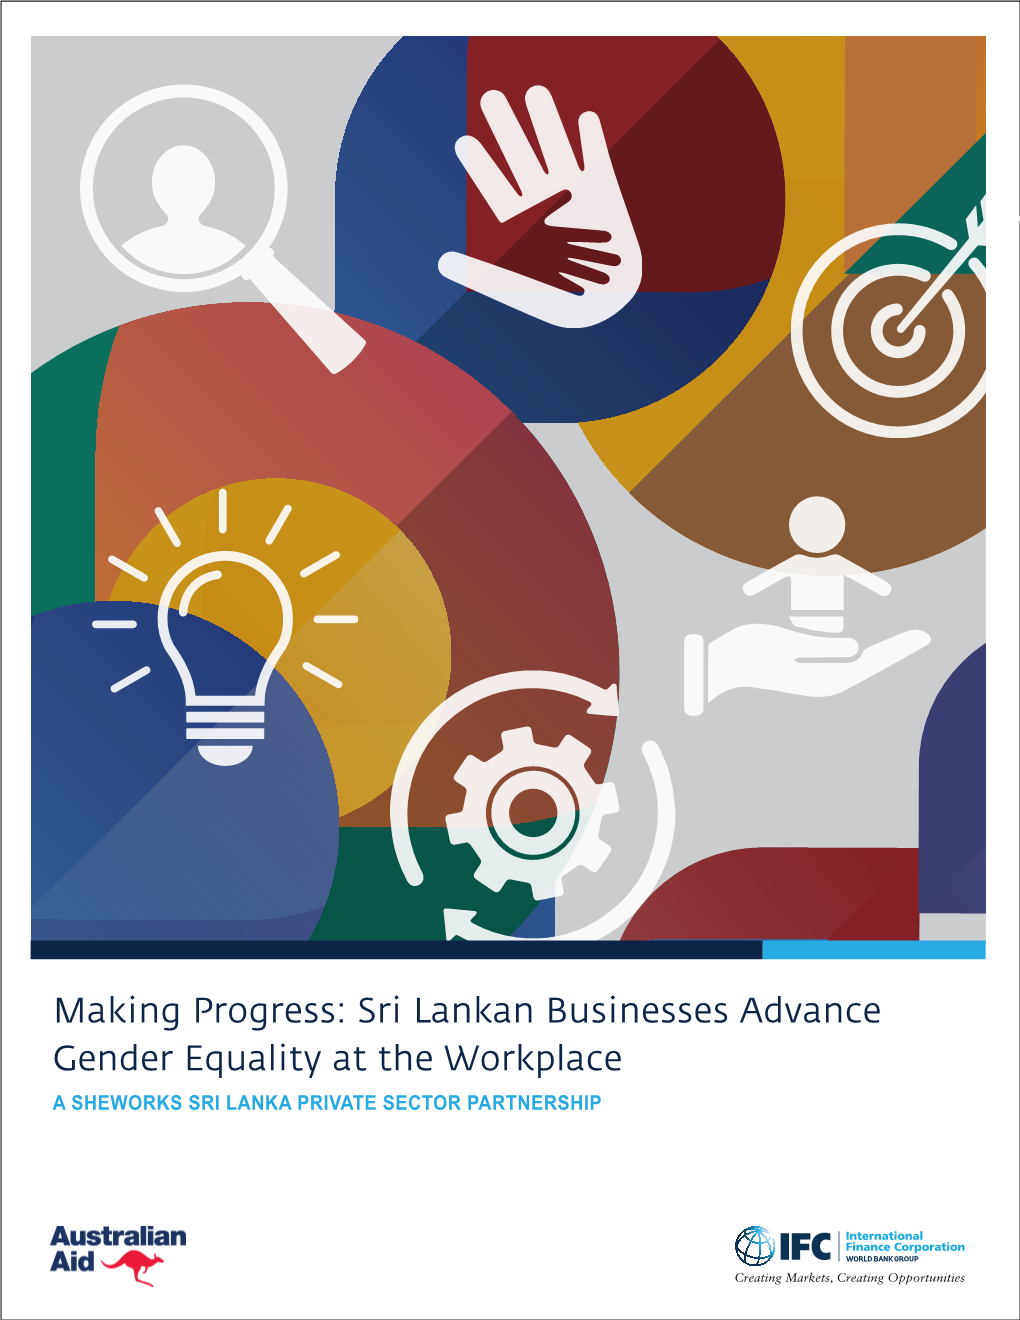 SRI LANKA Helping Firms Create More and Better Jobs for Women Has the Potential to Increase Business Profitability and Drive Economic Growth in Sri Lanka